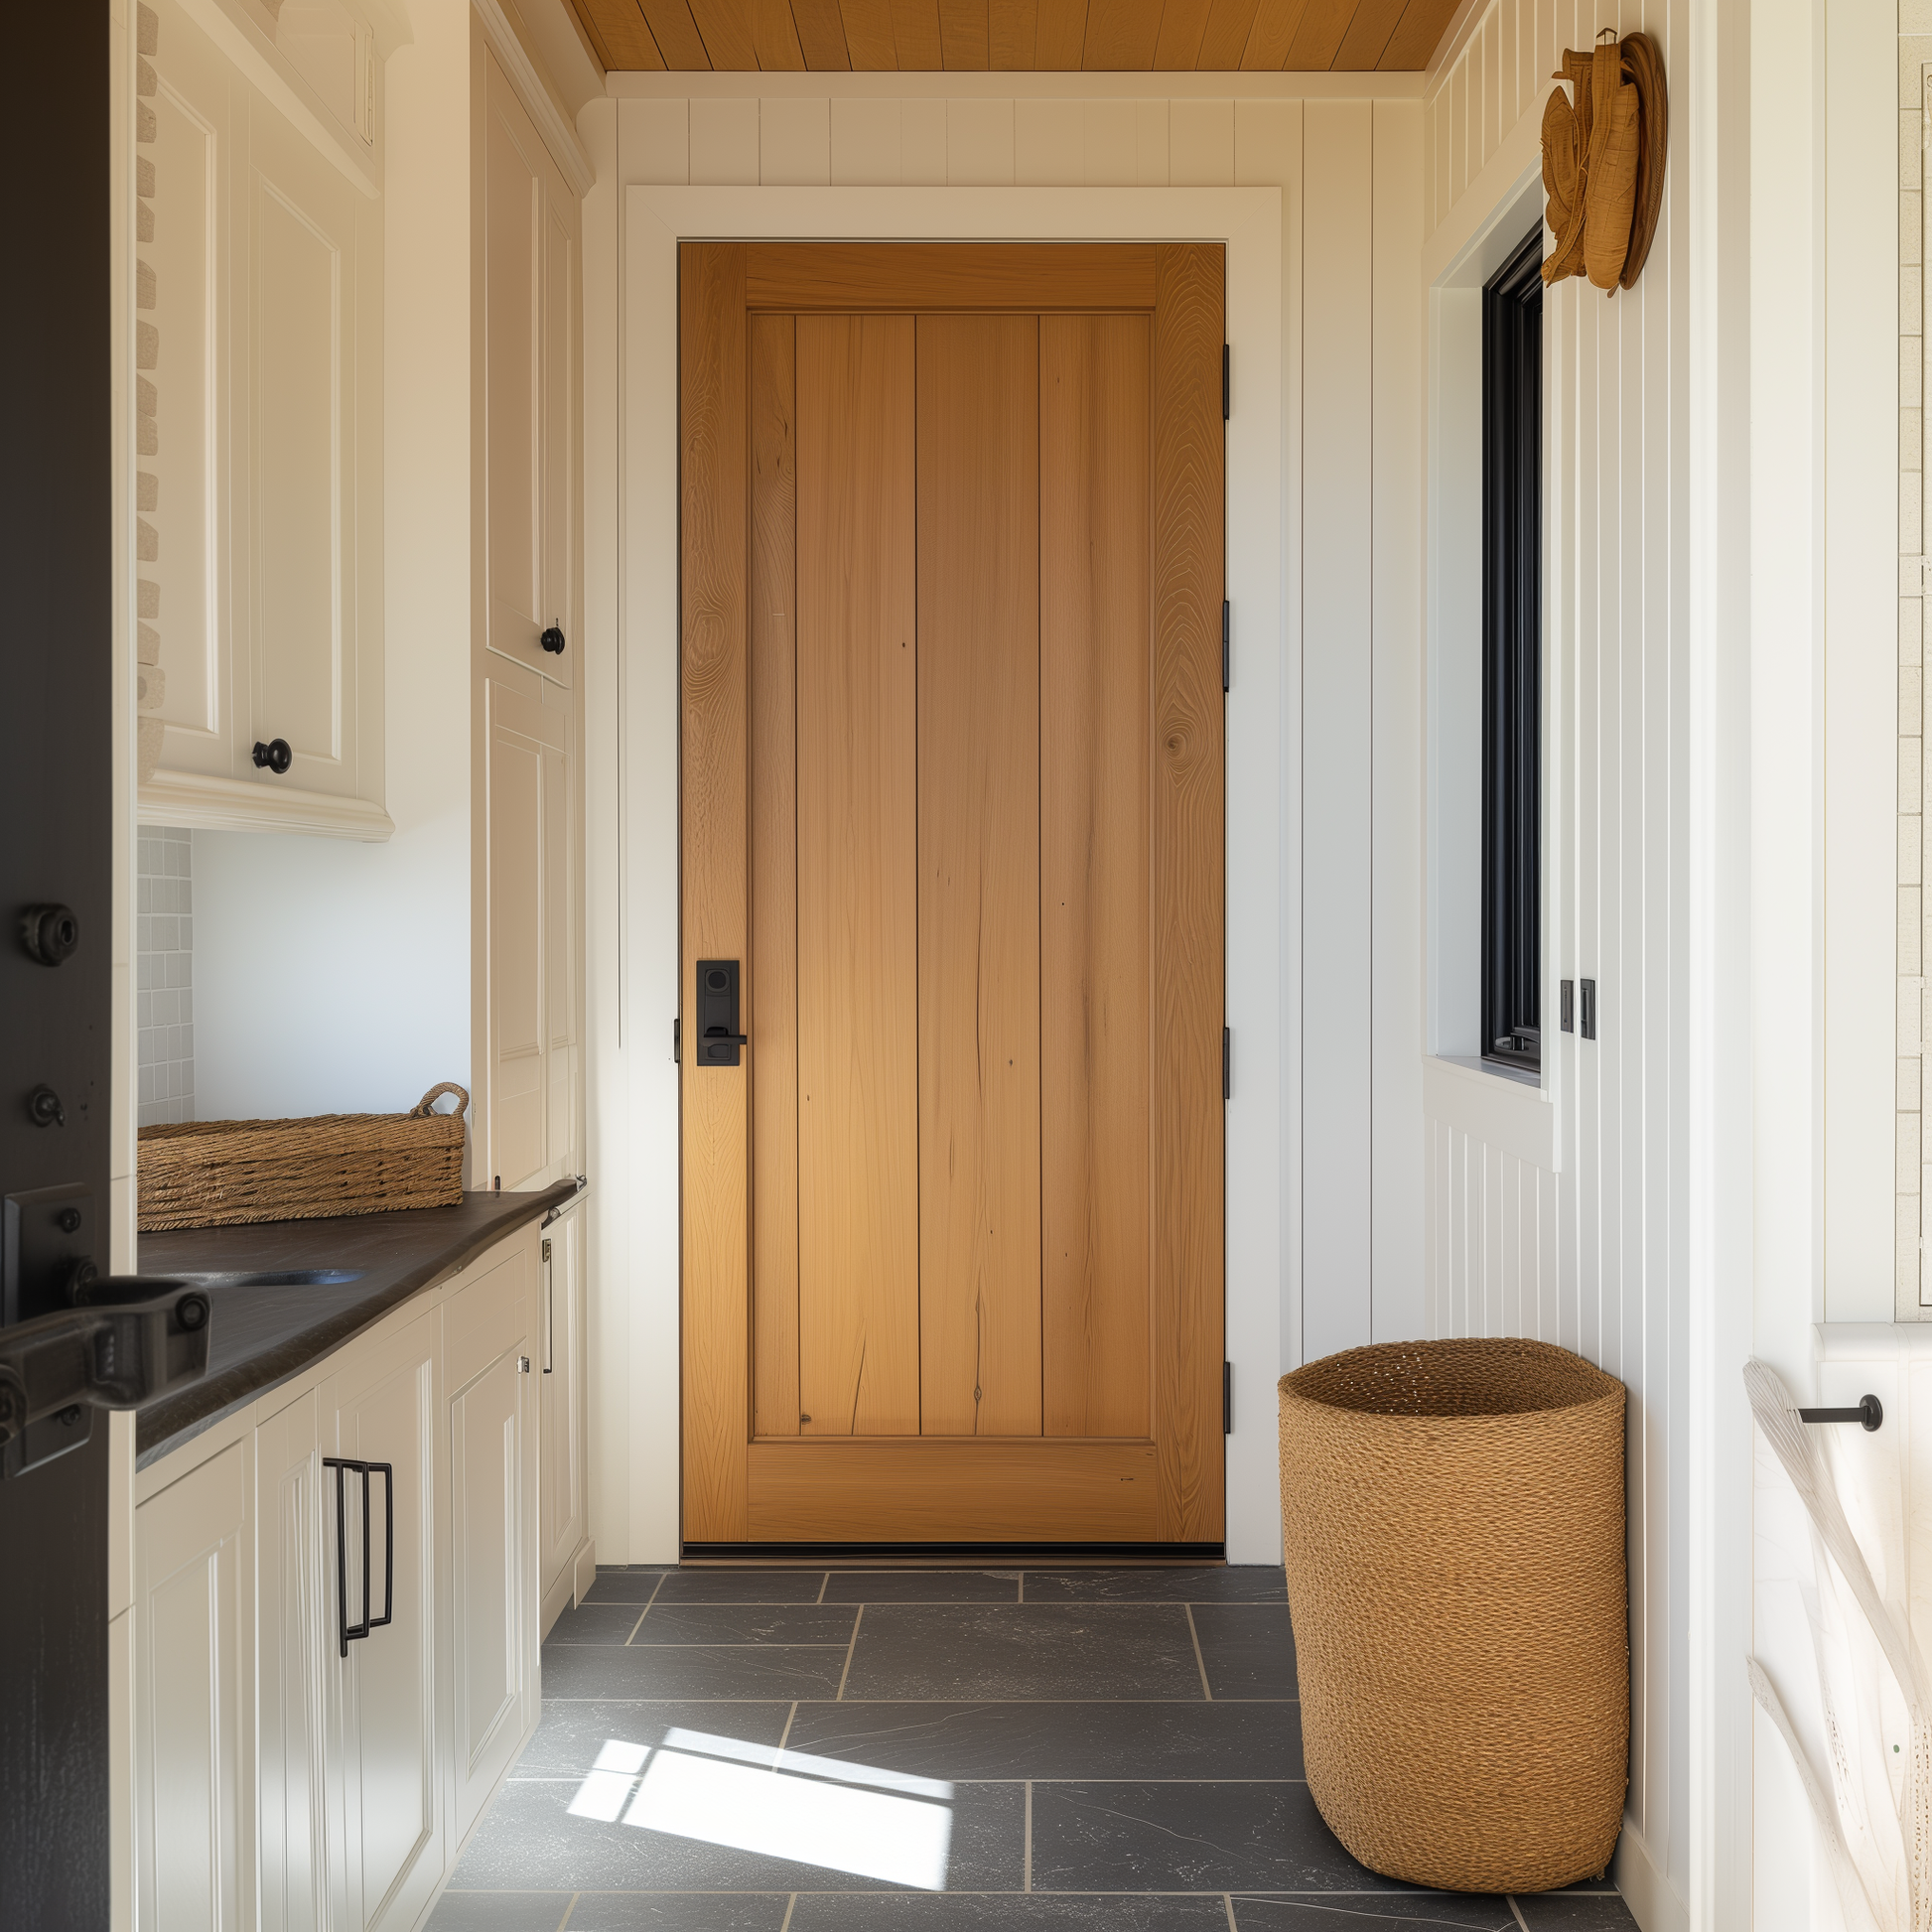 solid white oak interior door, bespoke fully customizable and custom built to order handcrafted from solid white oak. Pictured in an all white shiplap laundry room